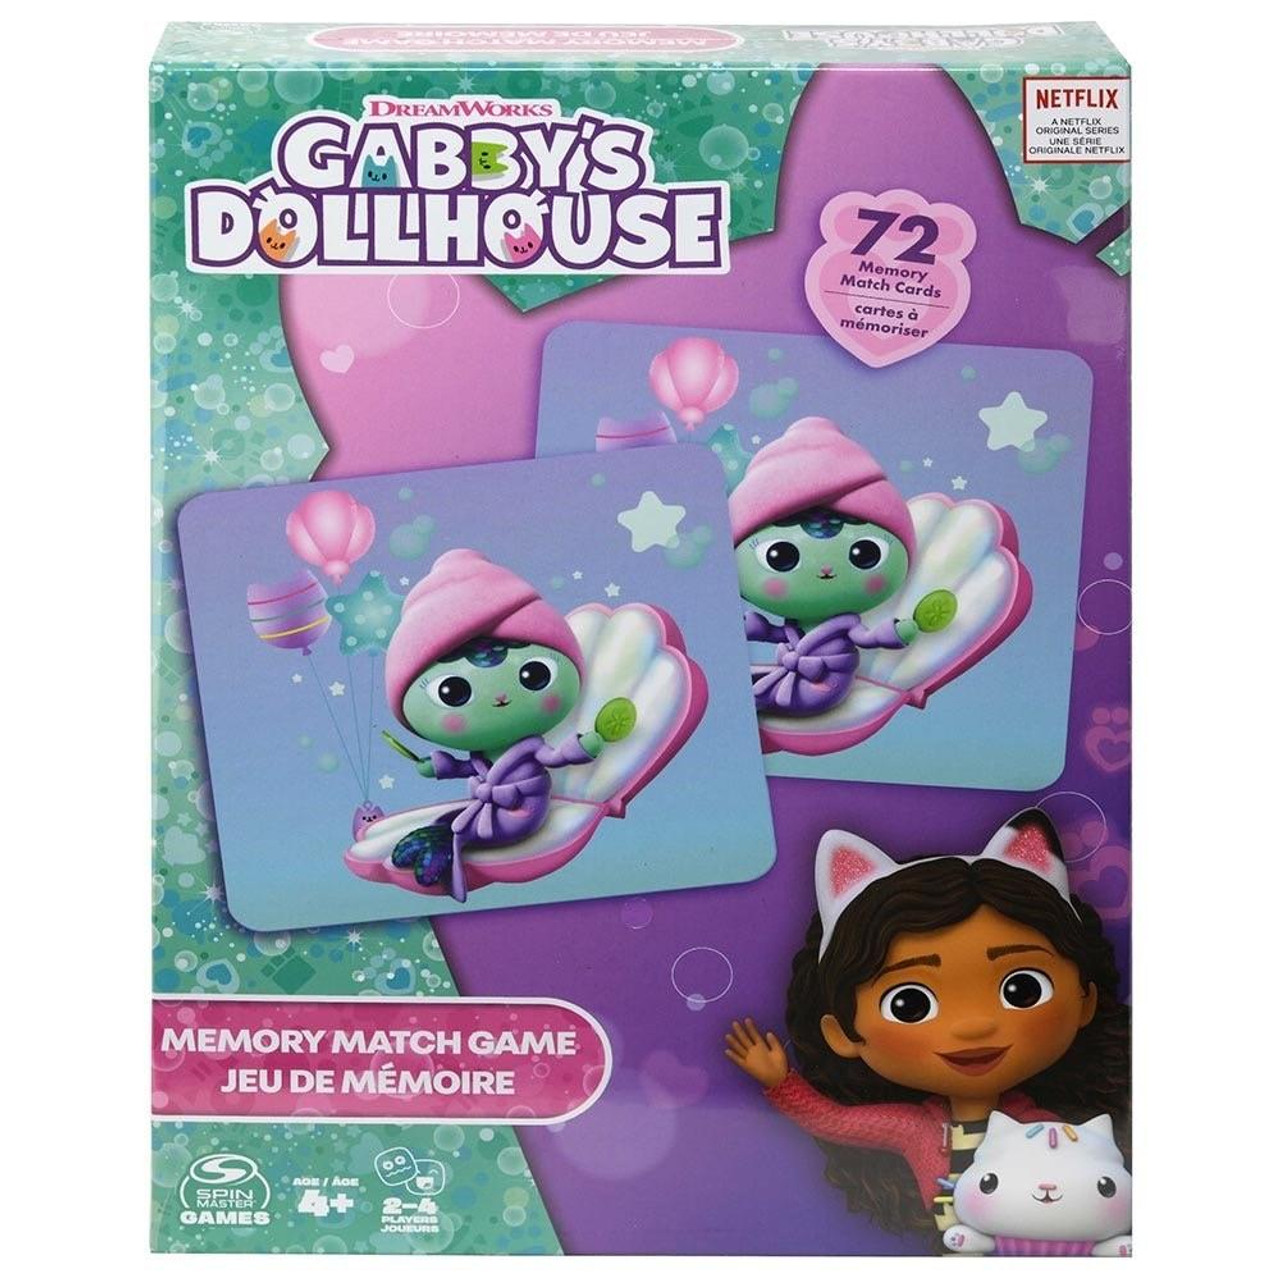 Gabby's Dollhouse Poster for Sale by Dreamcatcher11